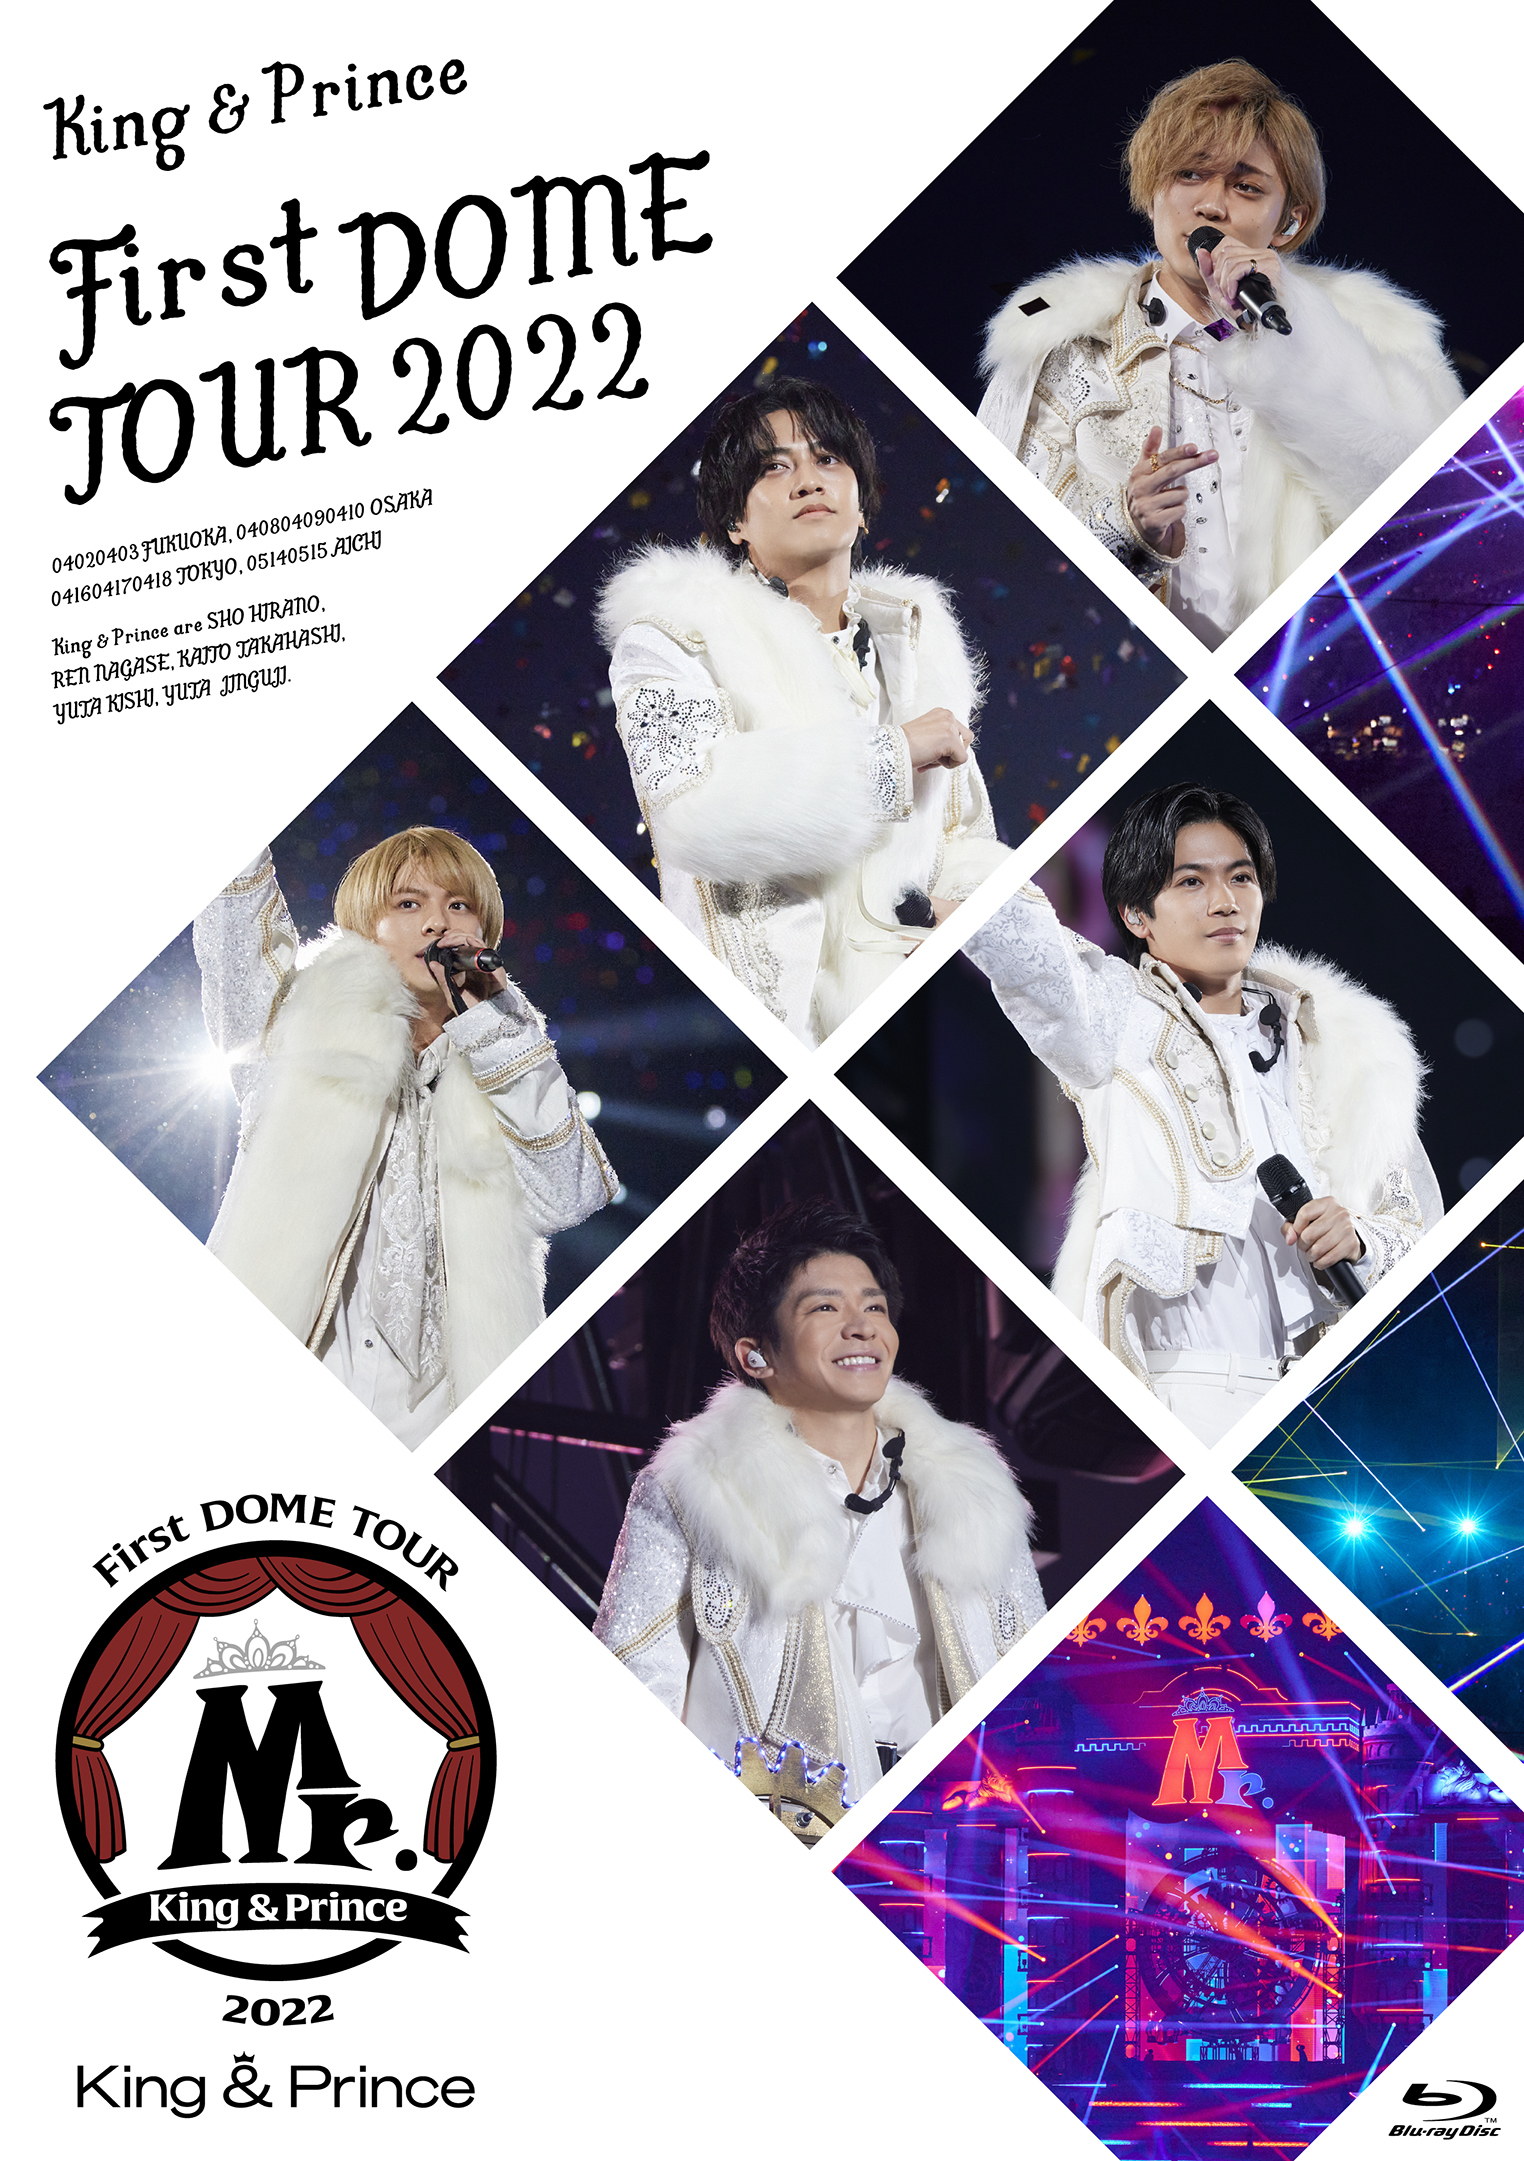 『King & Prince First DOME TOUR 2022 〜Mr.〜』通常盤ジャケット